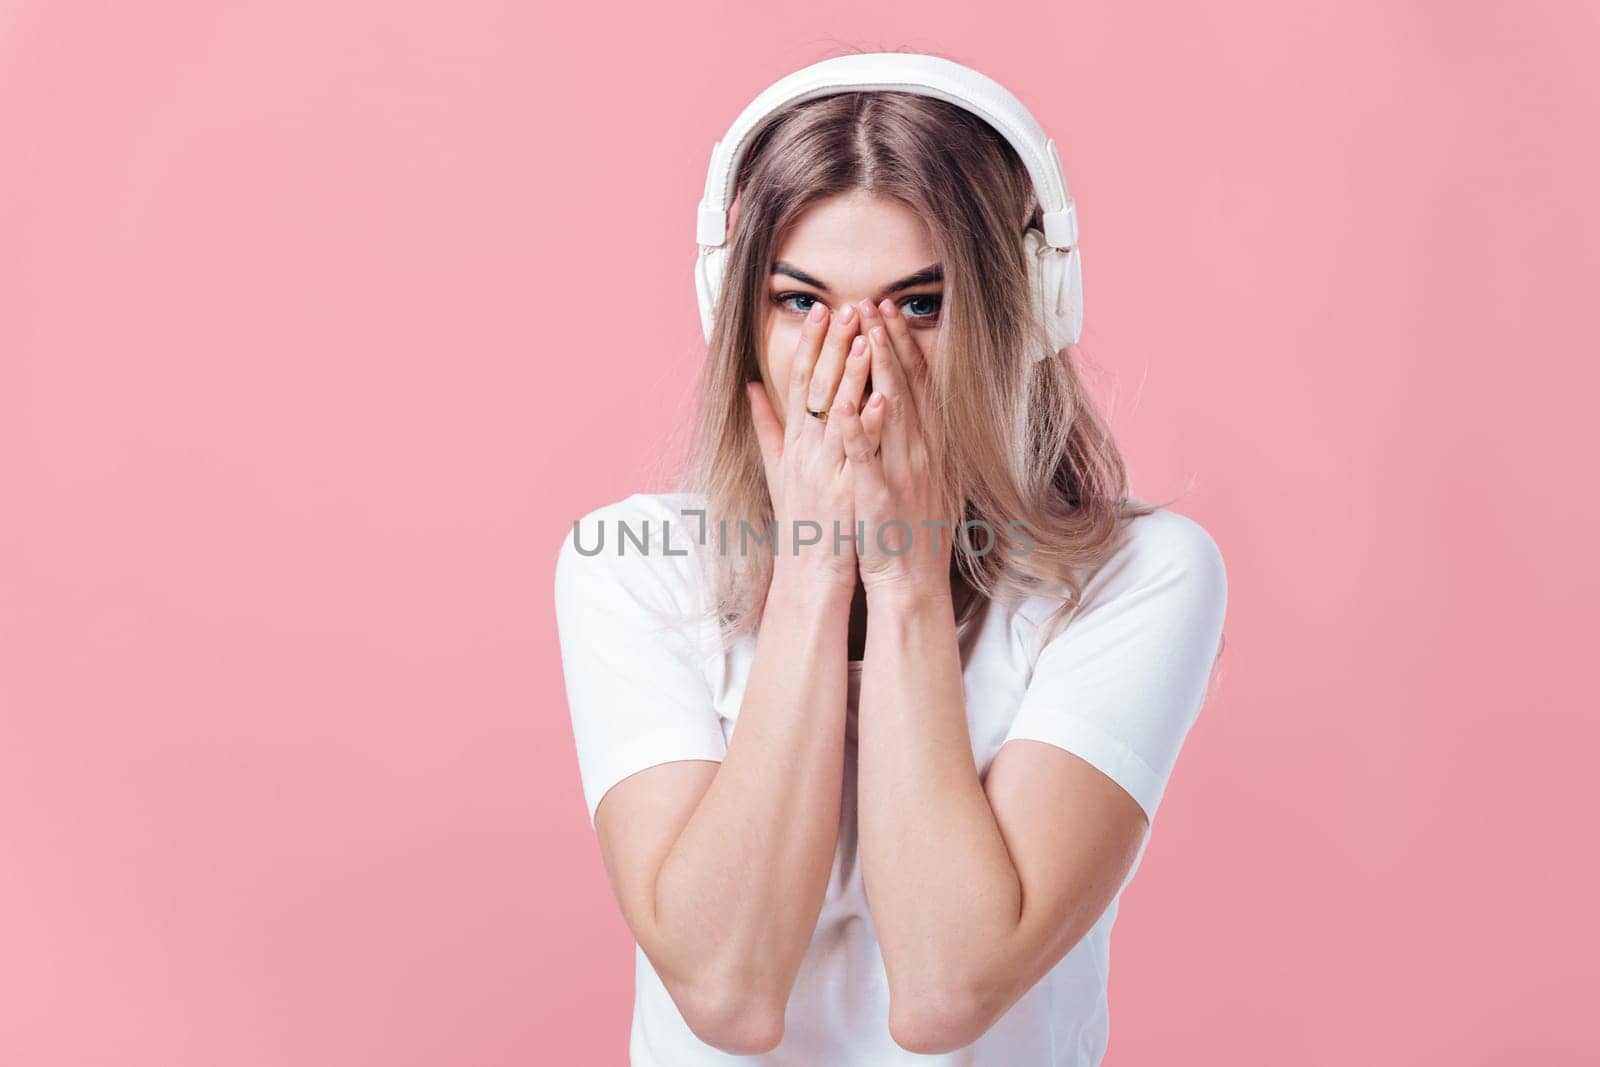 beautiful blonde woman in t-shirt and white headphones listens to music on pink background